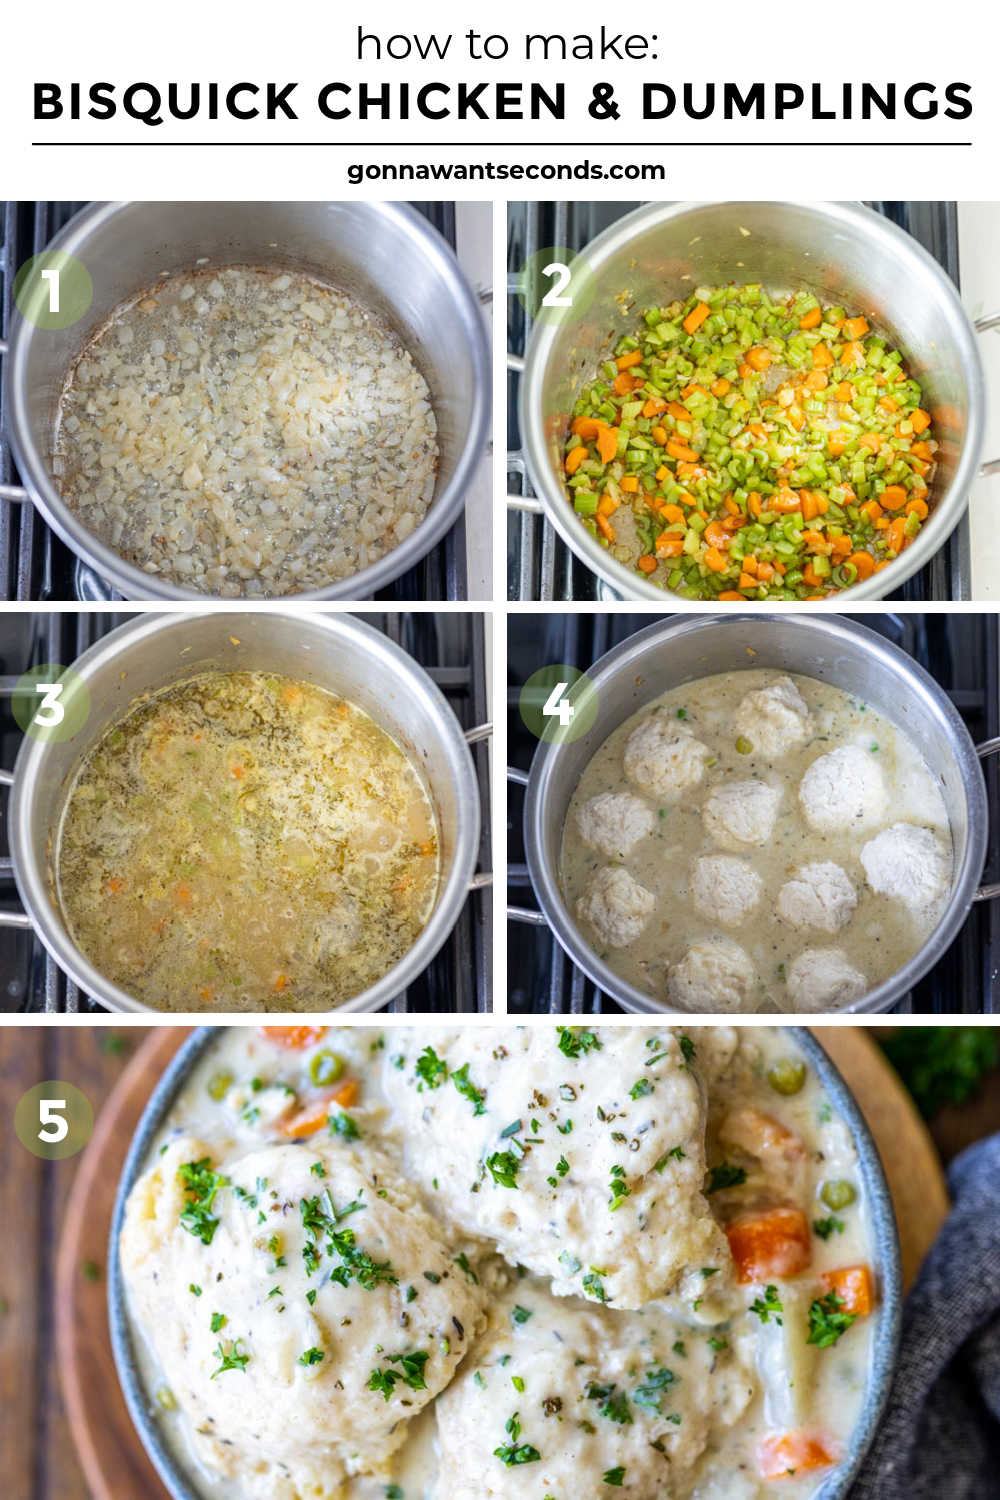 Step by step how to Bisquick chicken and dumplings